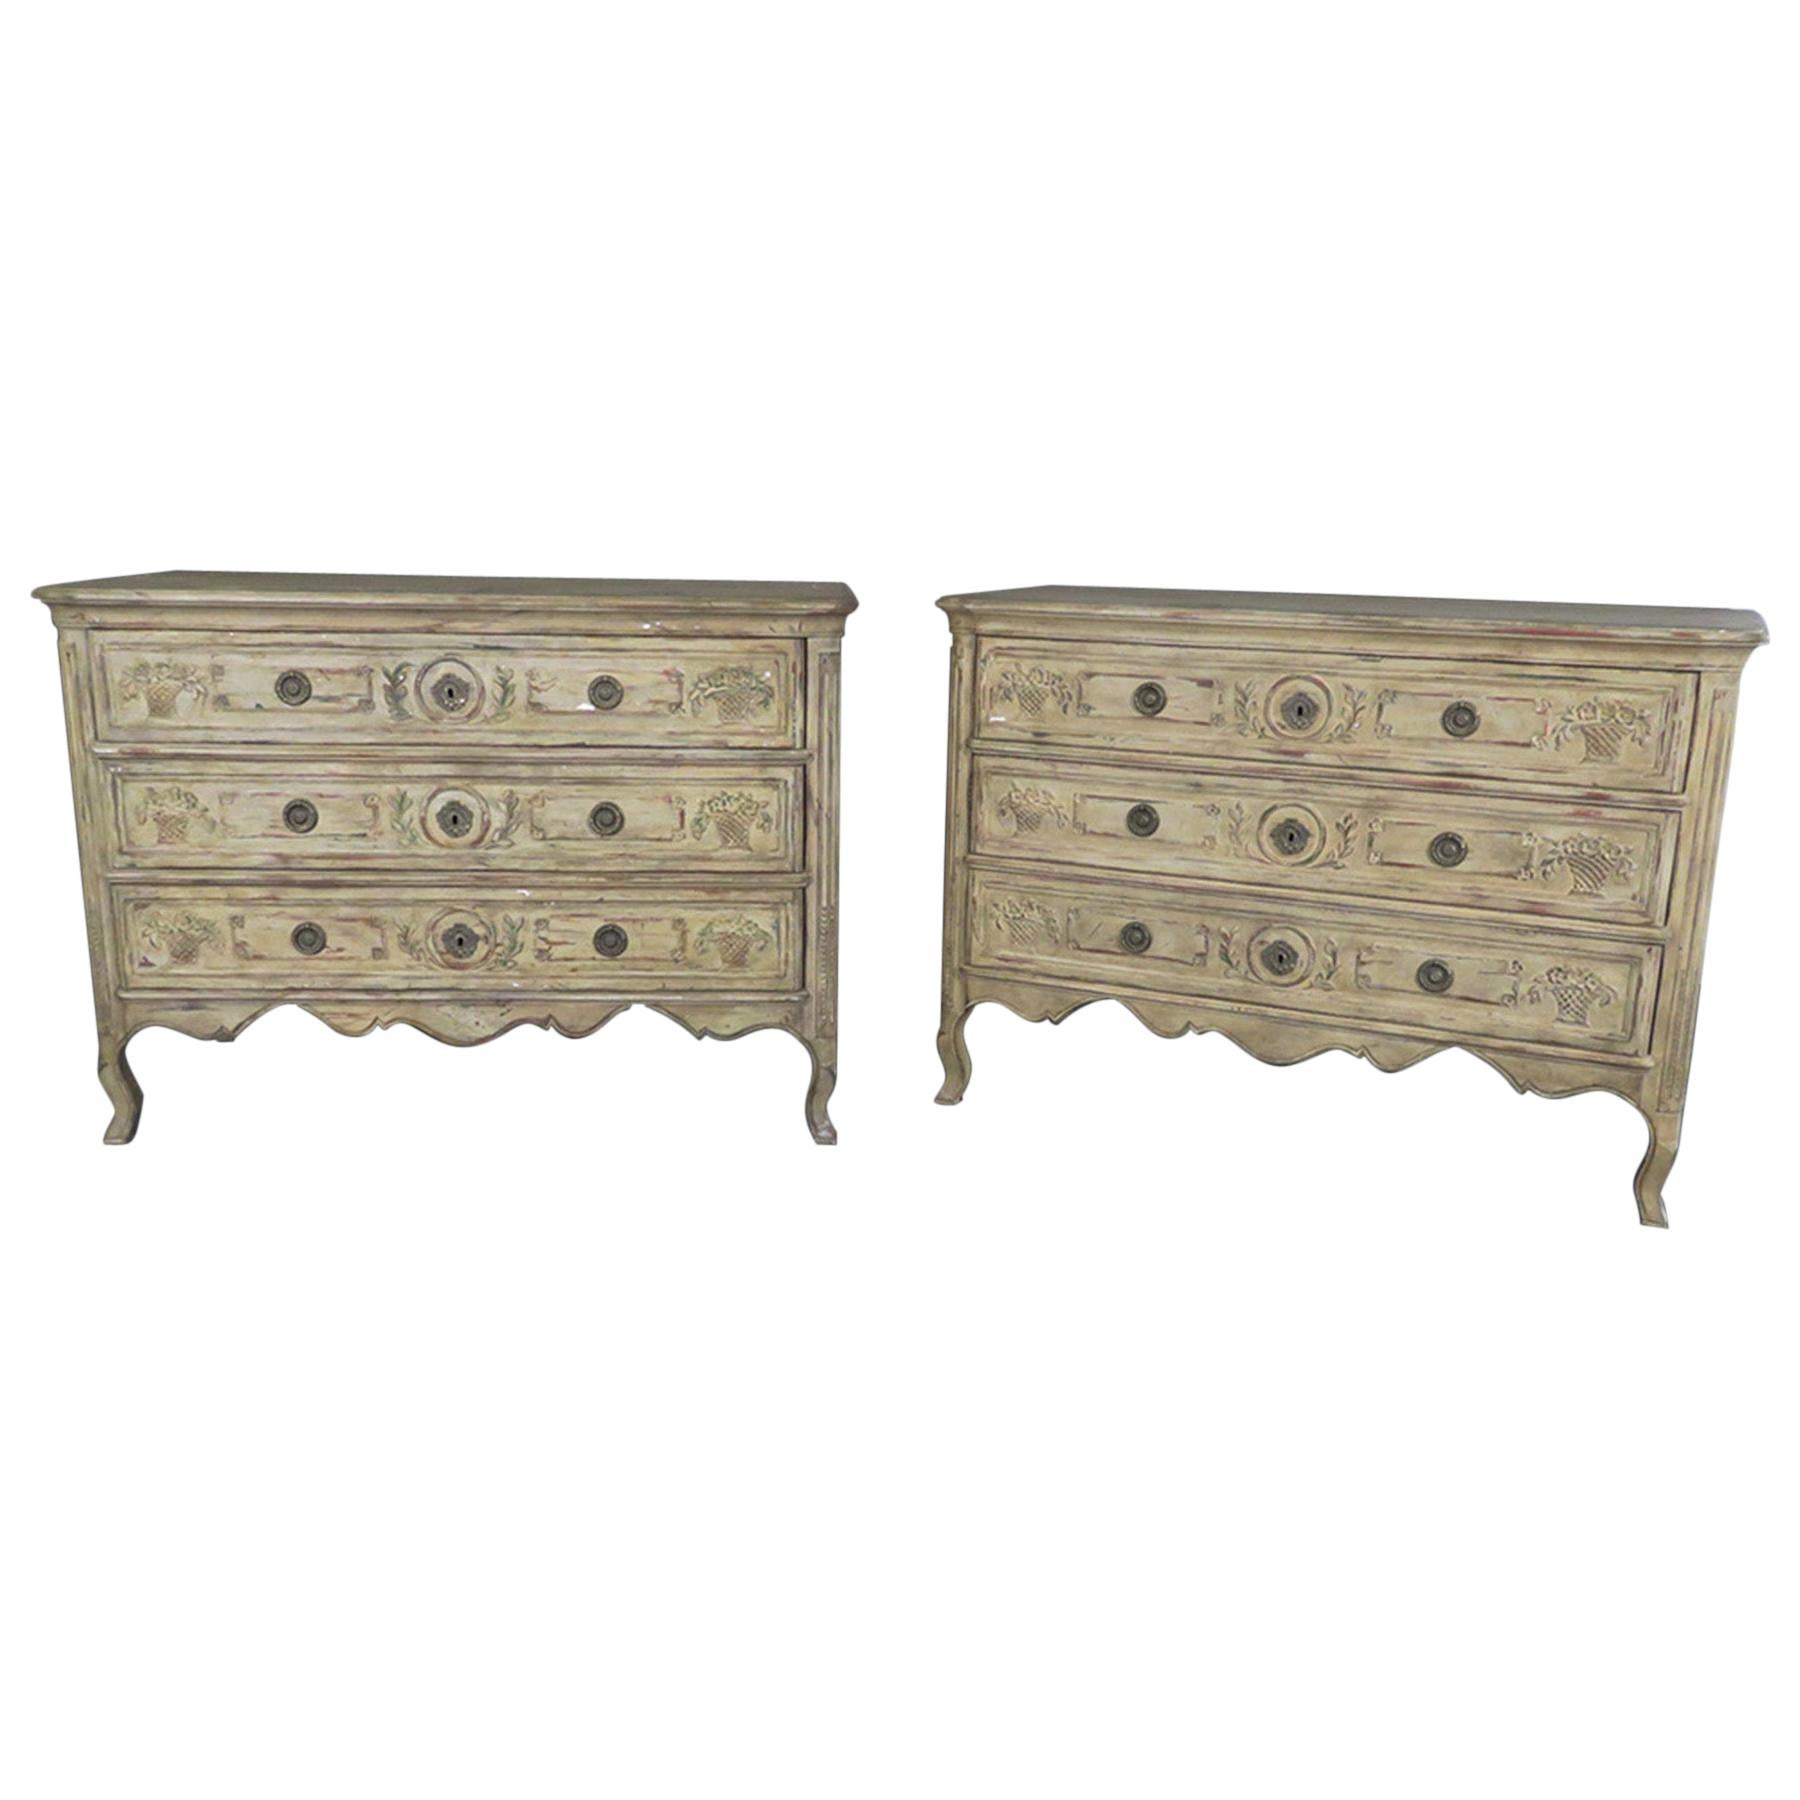 Pair Distressed Paint Decorated John Widdicomb Louis XV Carved Commodes Dressers